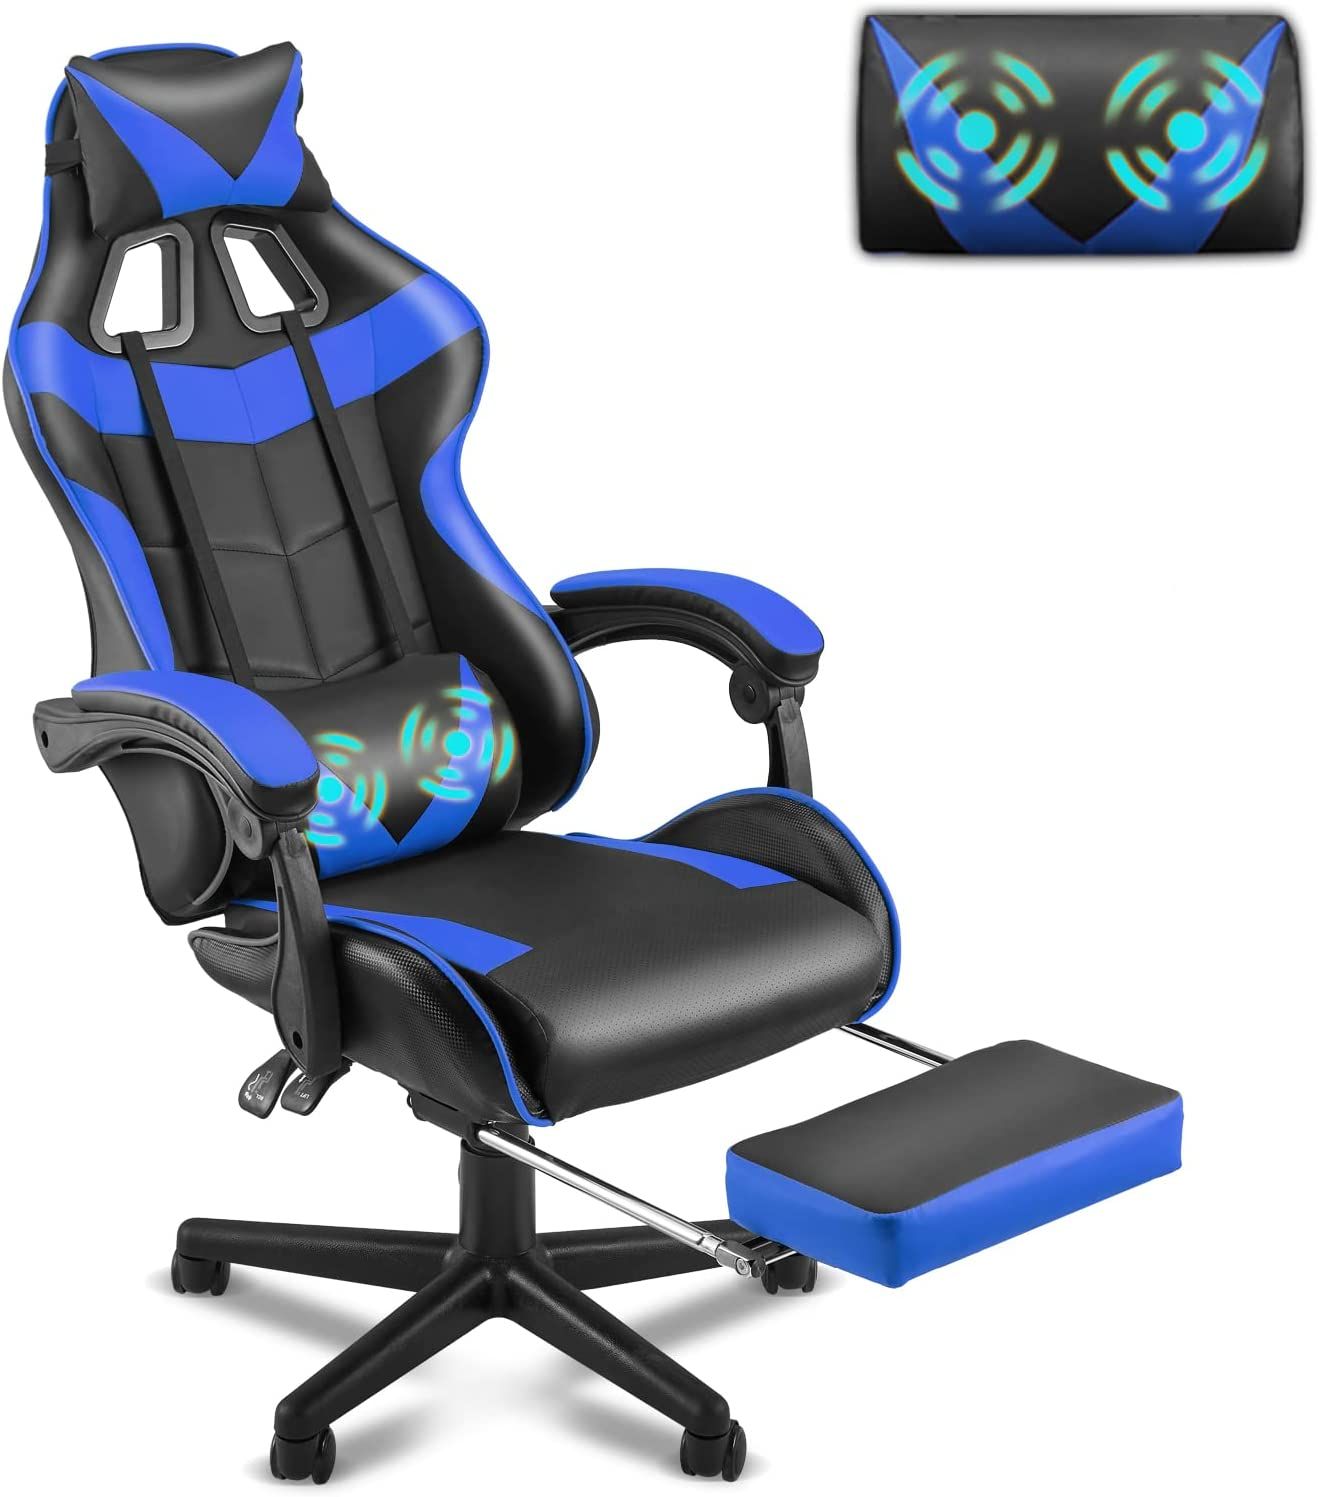 Soontrans blue gaming chair with footrest